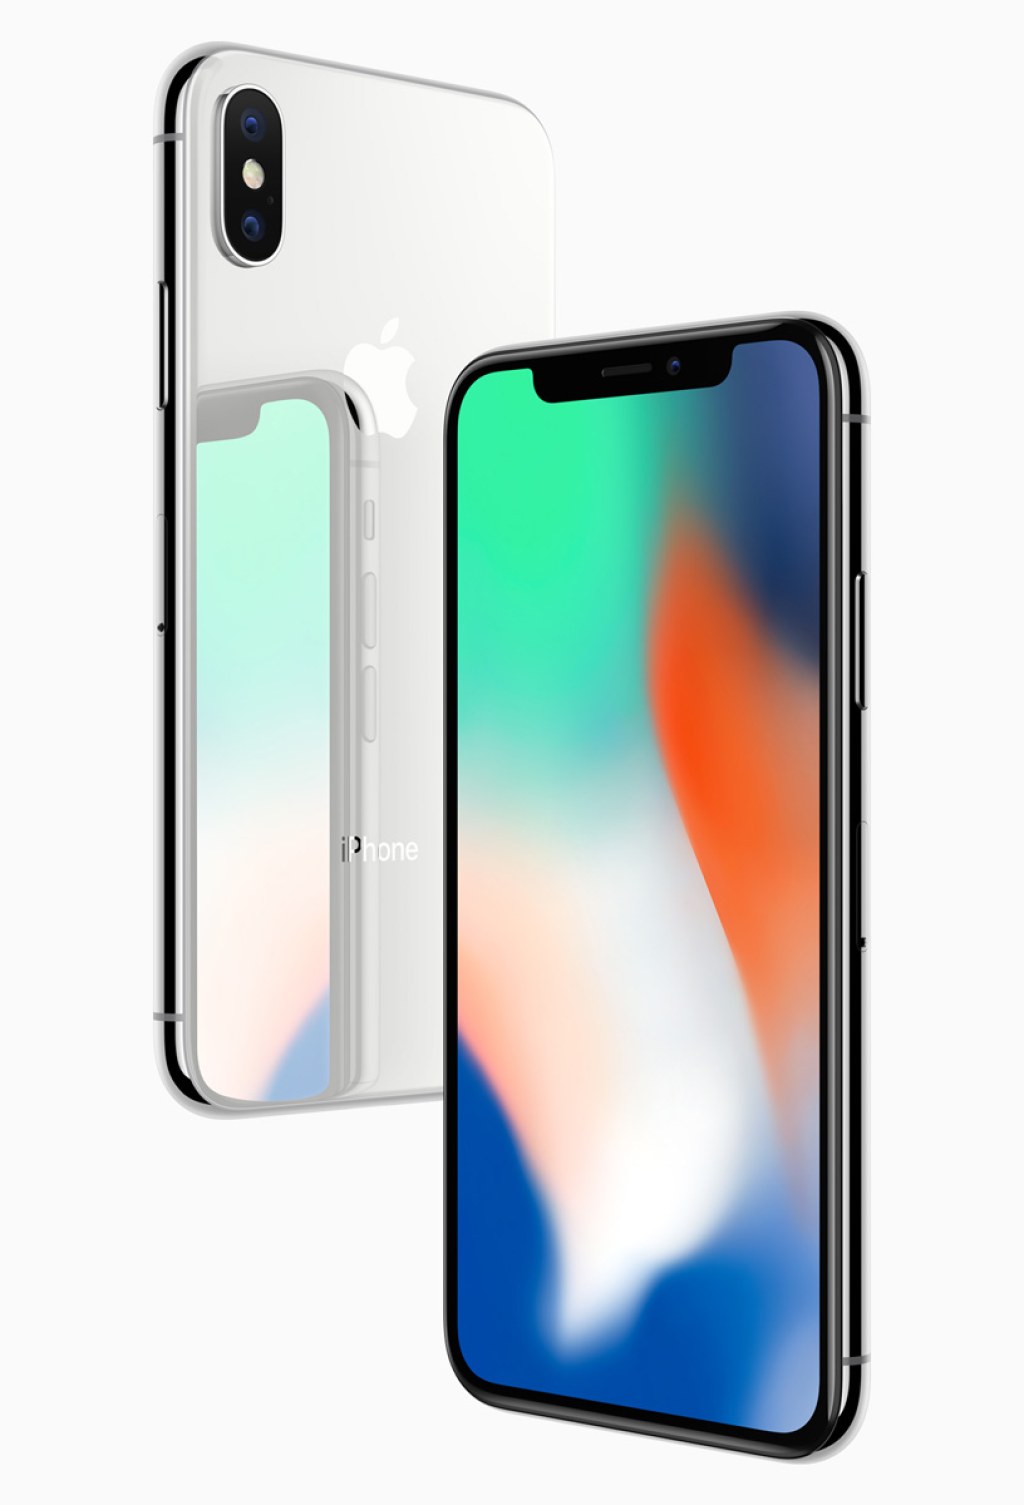 Picture of: The future is here: iPhone X – Apple